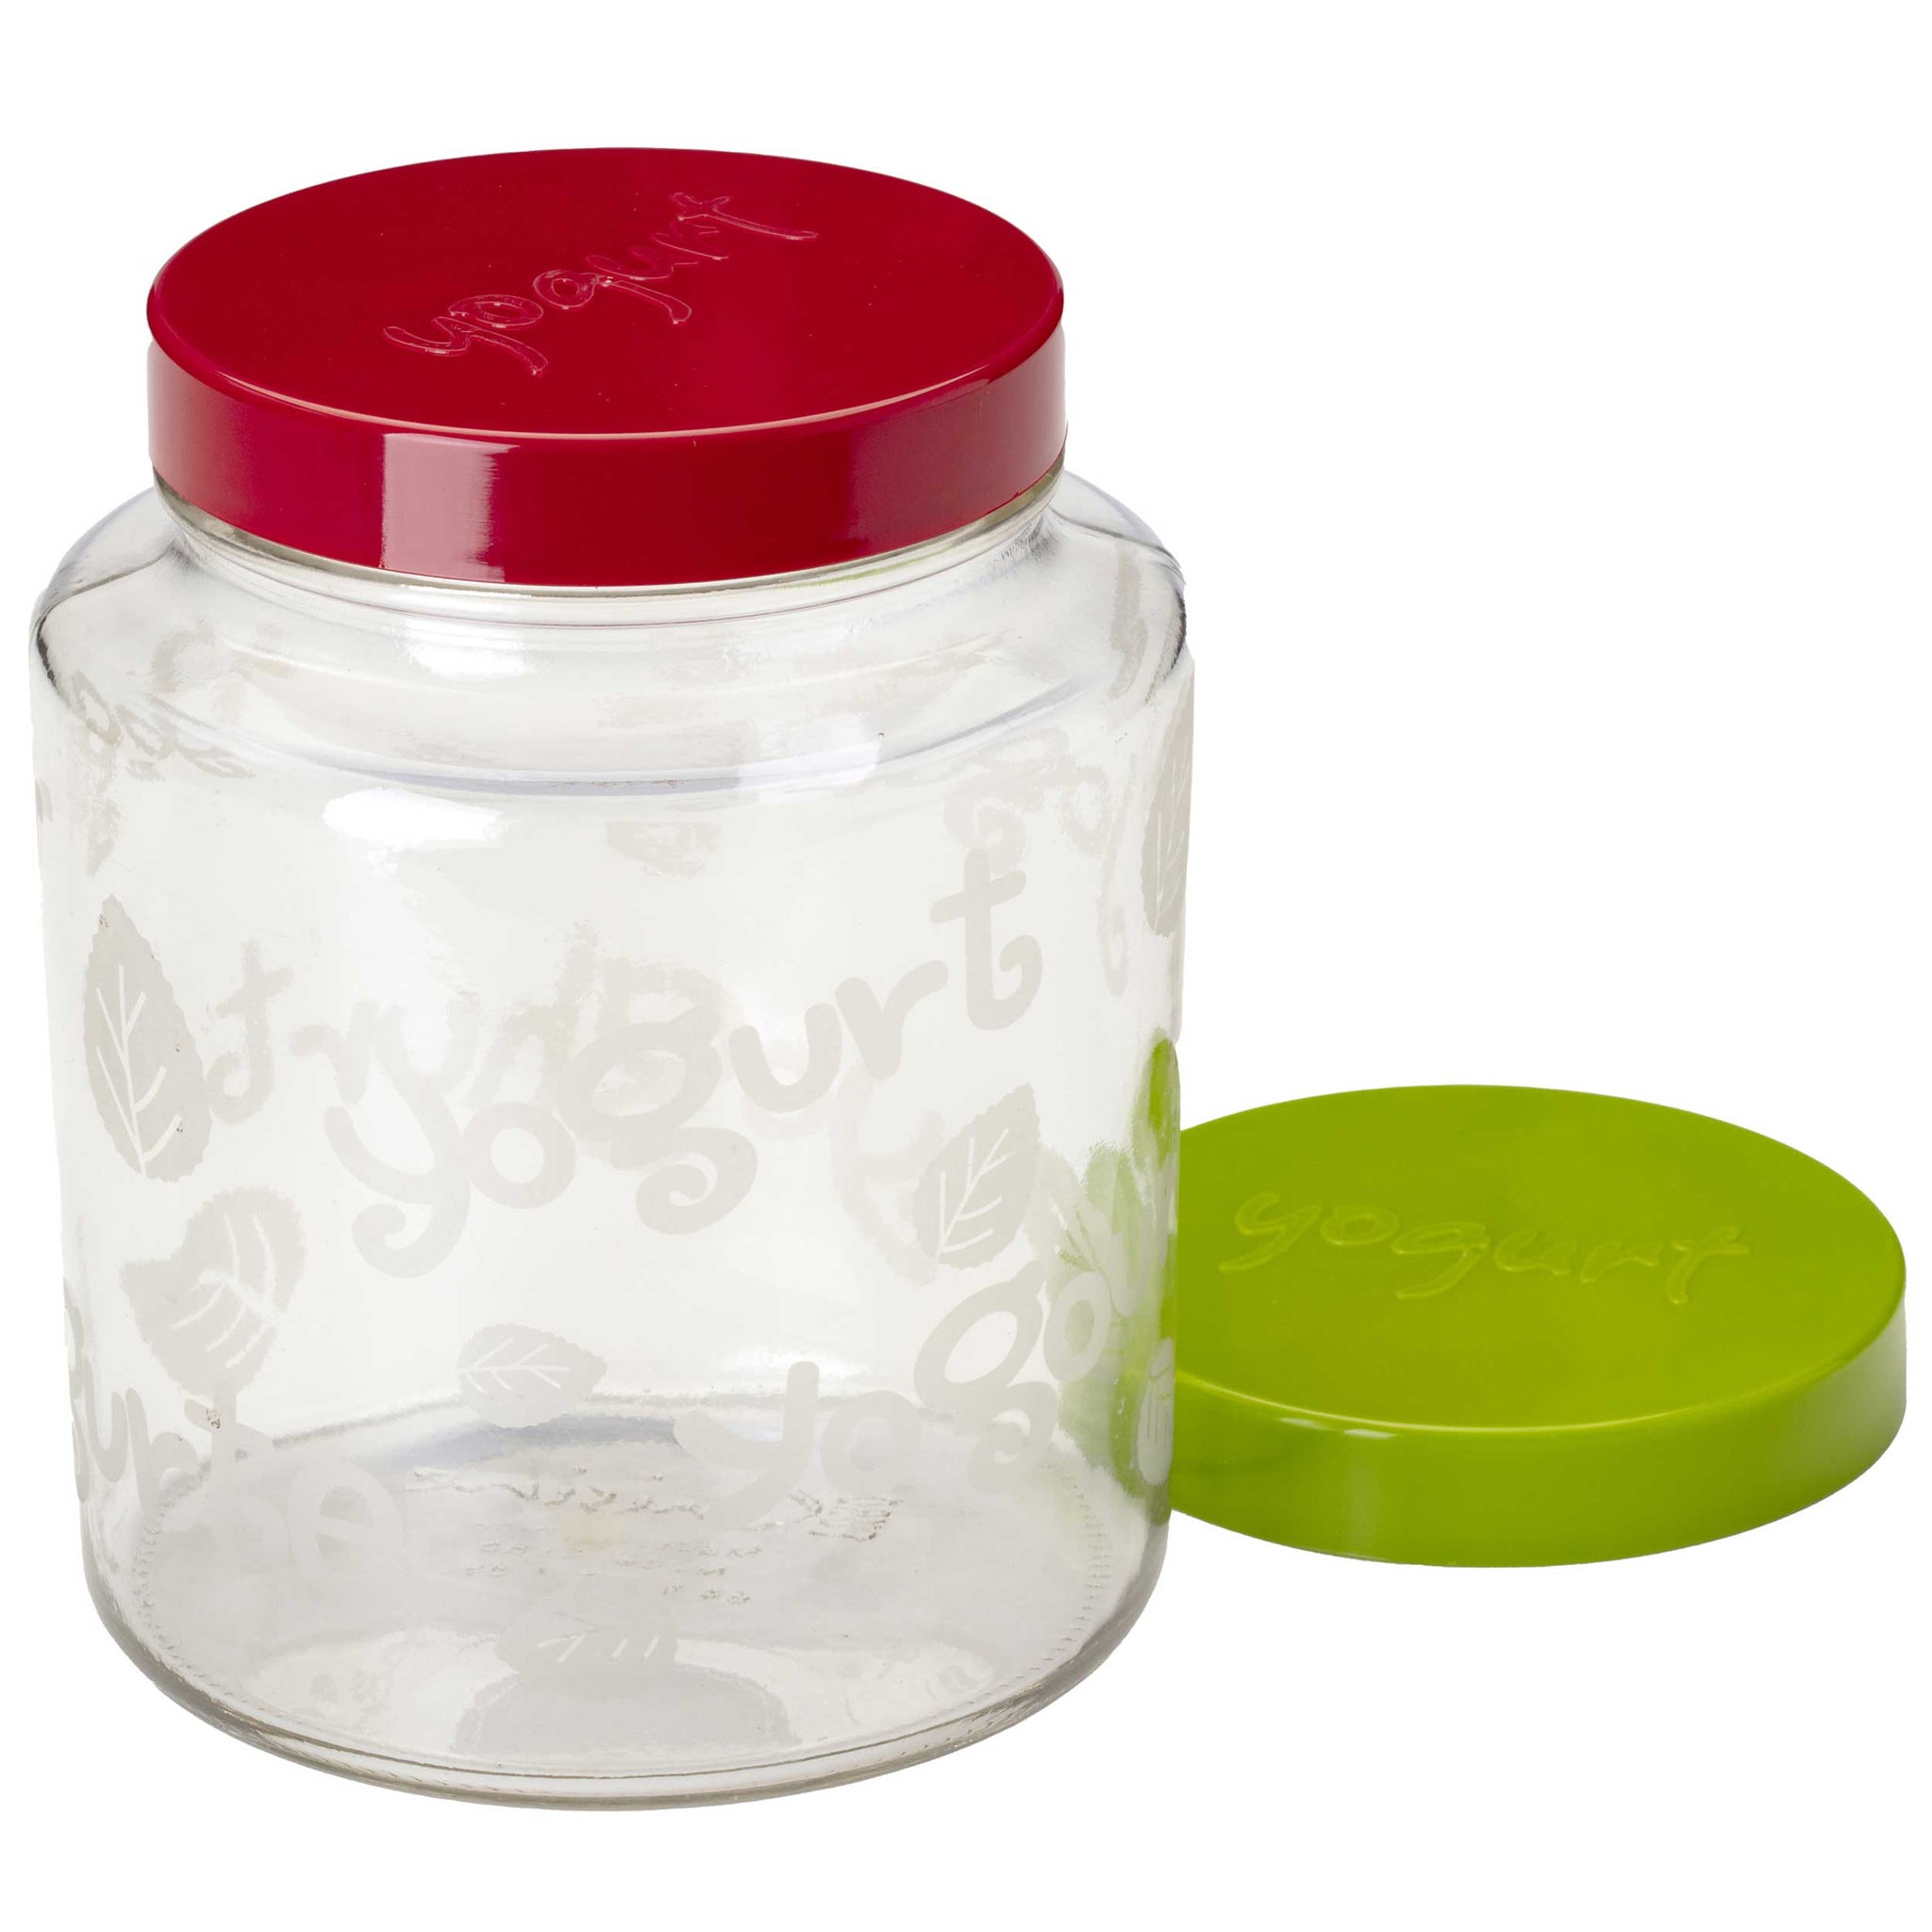 Buy 1/2 (Half) Gallon Glass Jar with Lid (Made in USA)